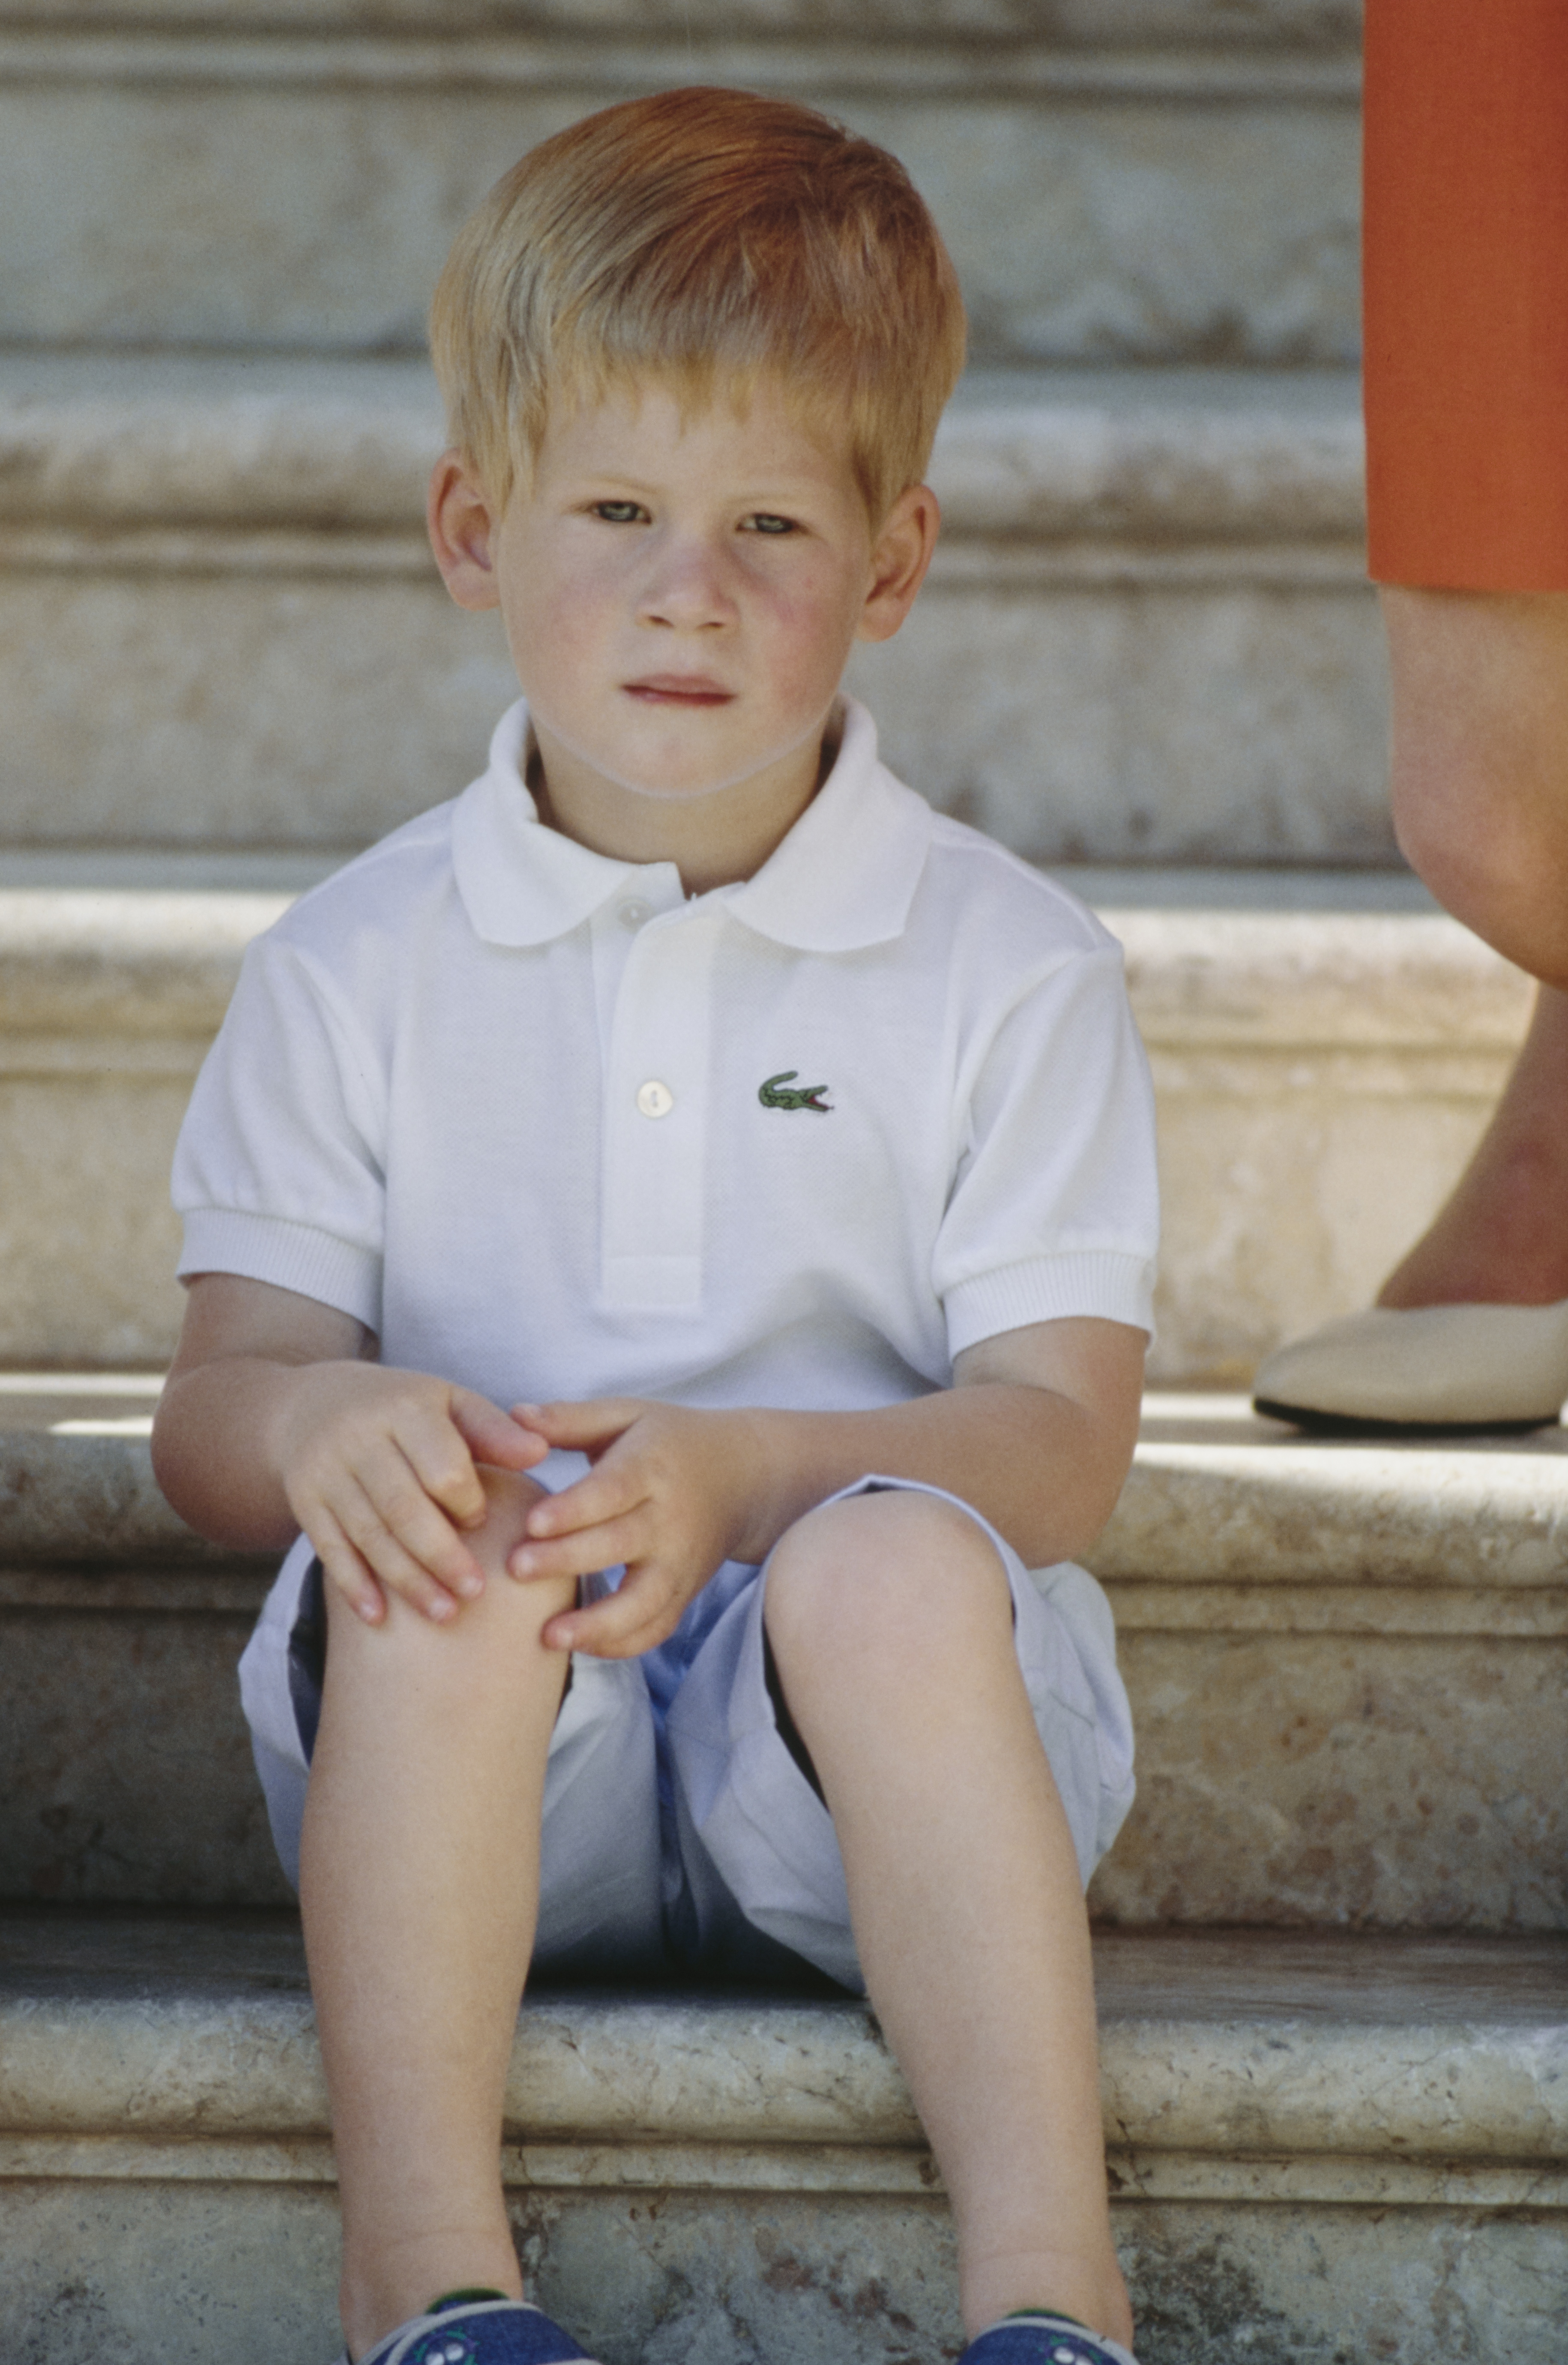 Prince Harry on August 13, 1988 in Palma de Mallorca, Spain | Source: Getty Images